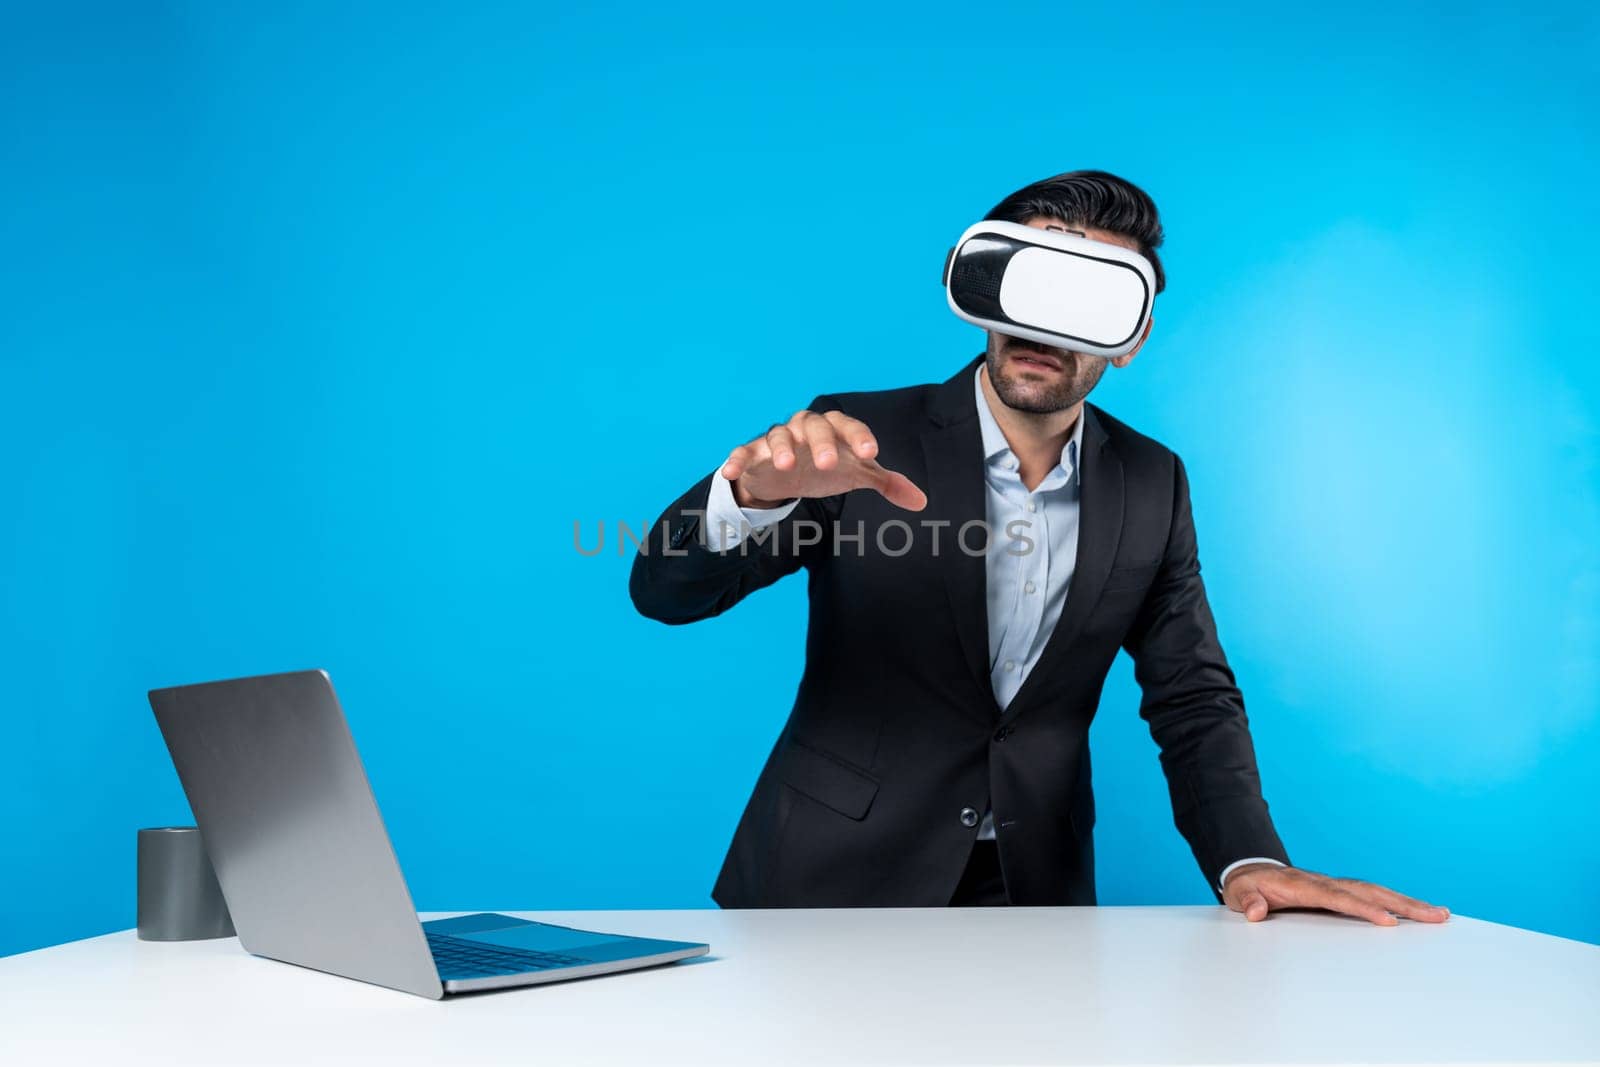 Professional project manager looking by using VR goggle while sitting at laptop. Skilled business man wearing visual reality headset while connecting metaverse or visual world. Innovation. Deviation.